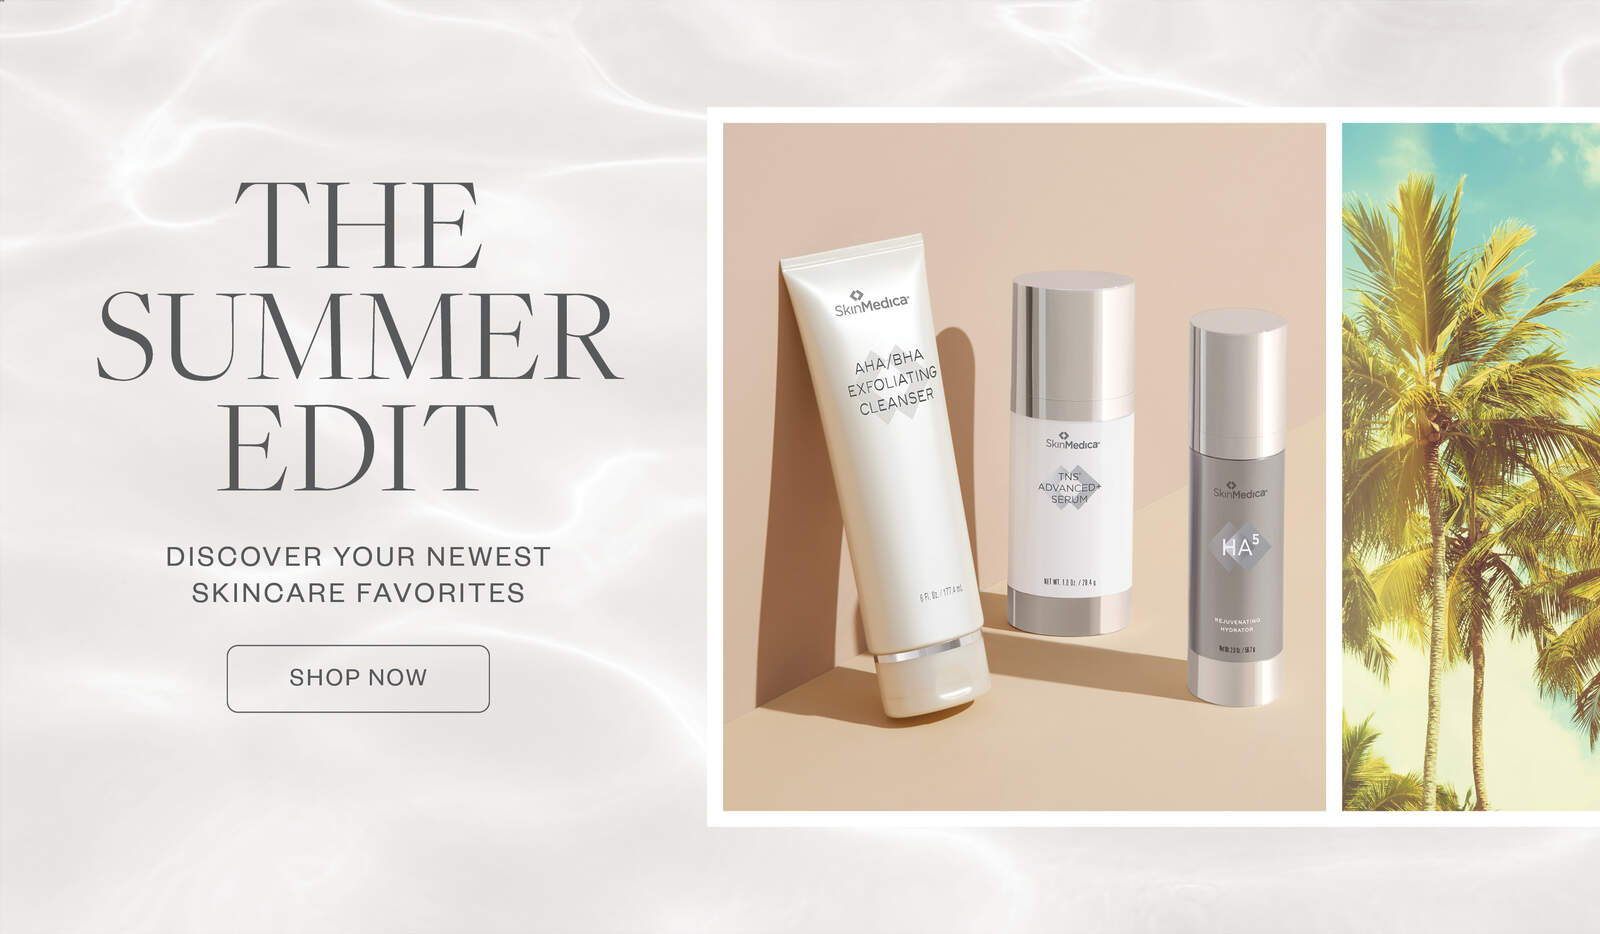 Discover your newest skincare favorites